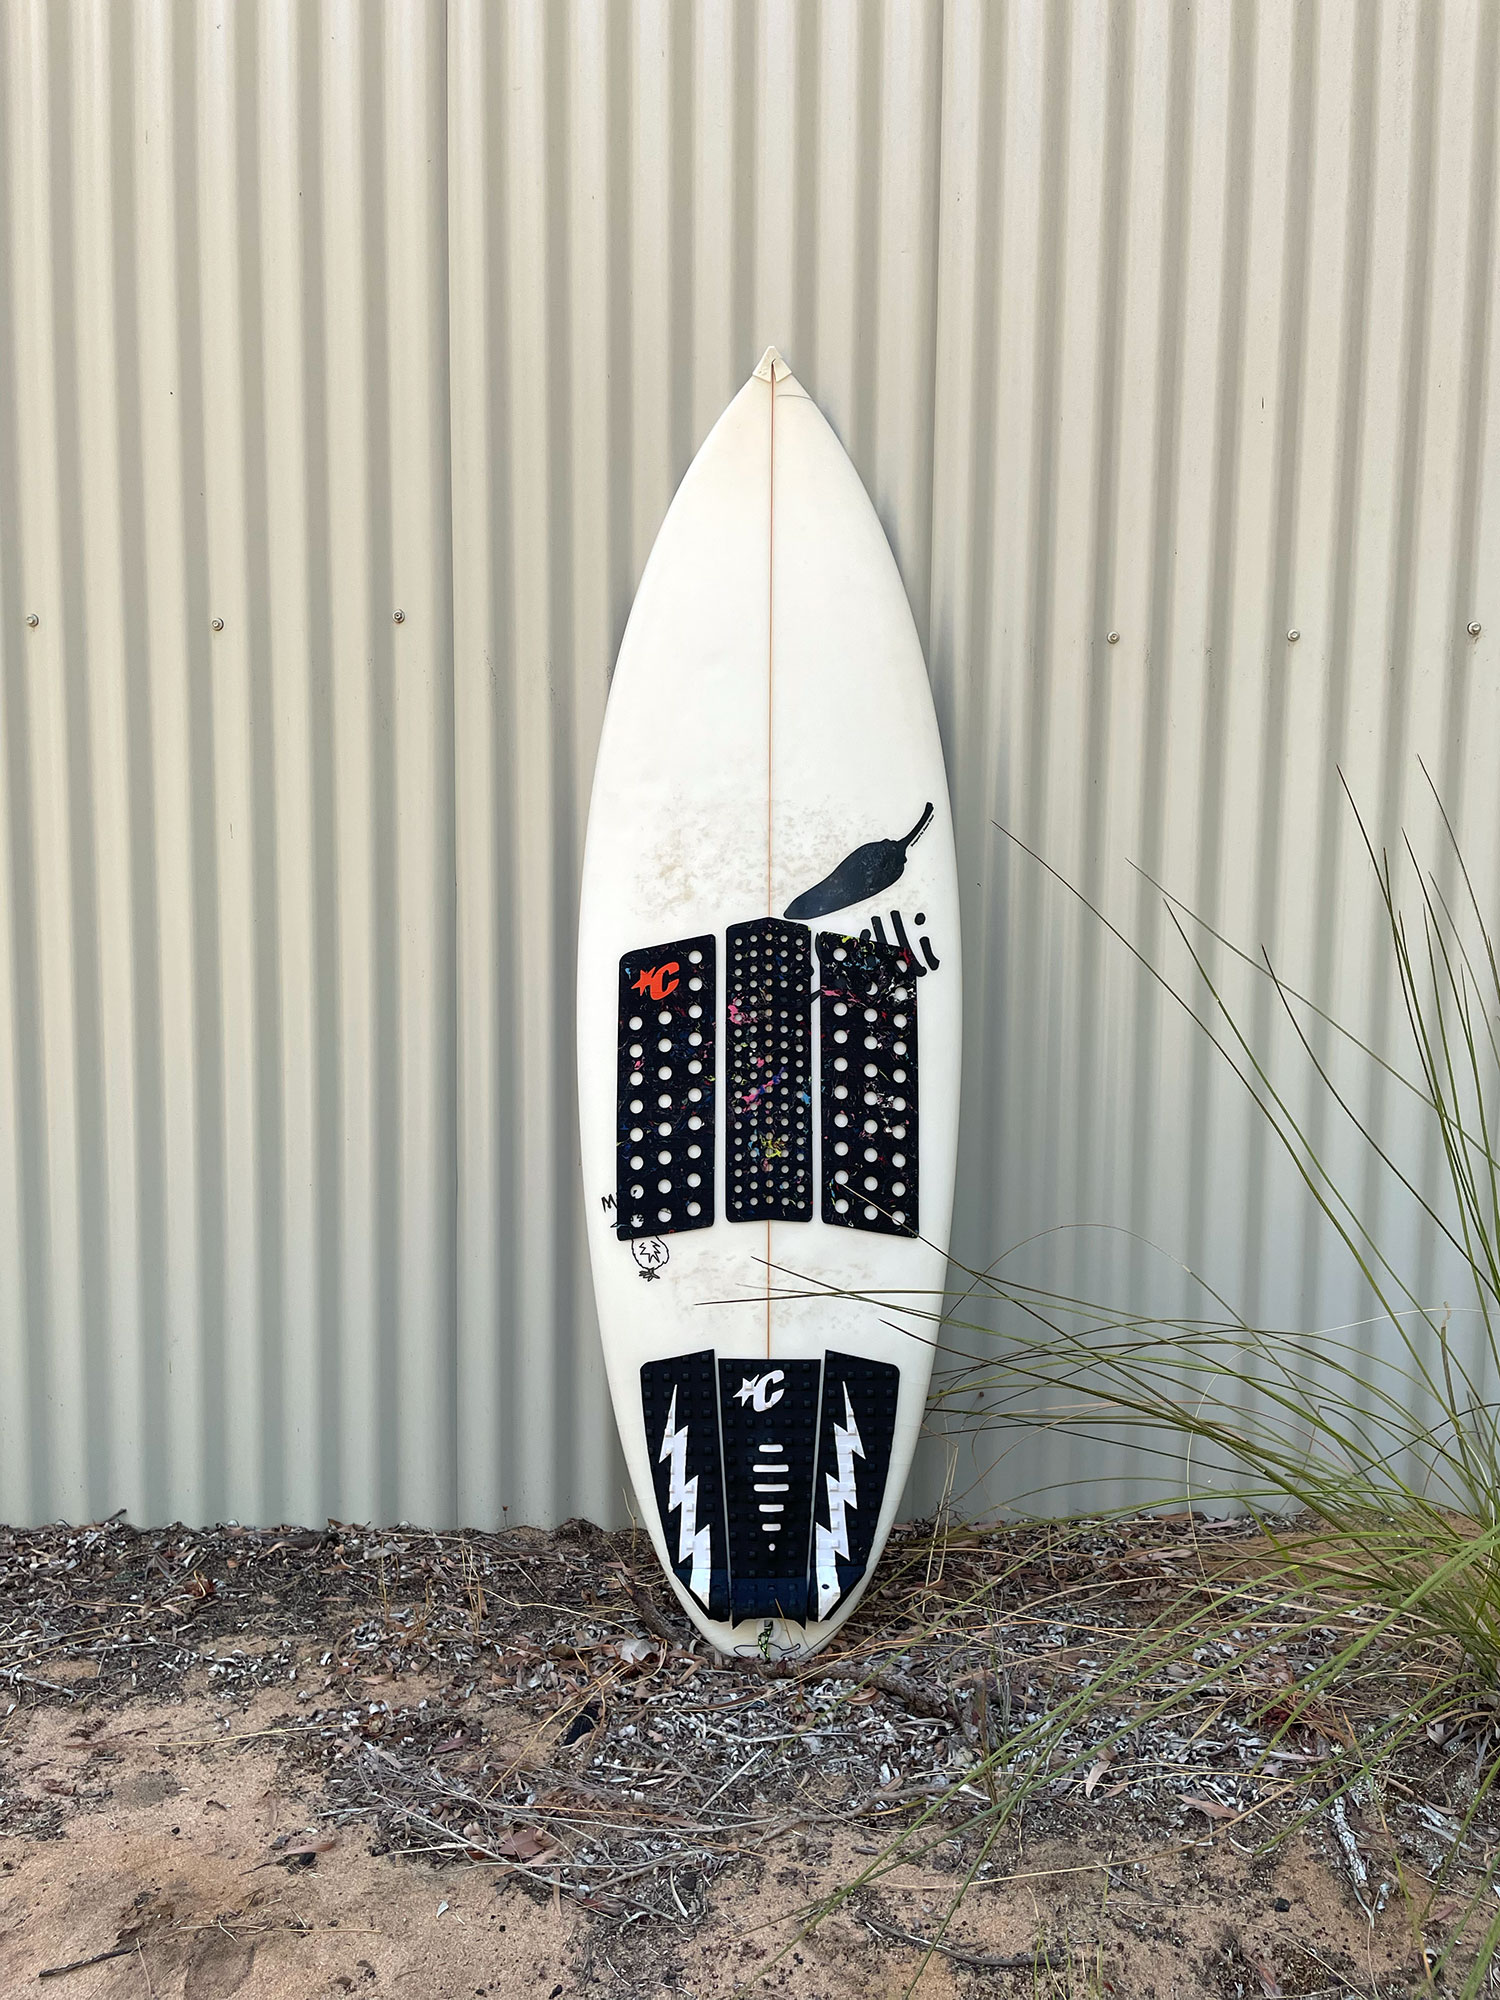 Chill Surfboards Mini Bird Review